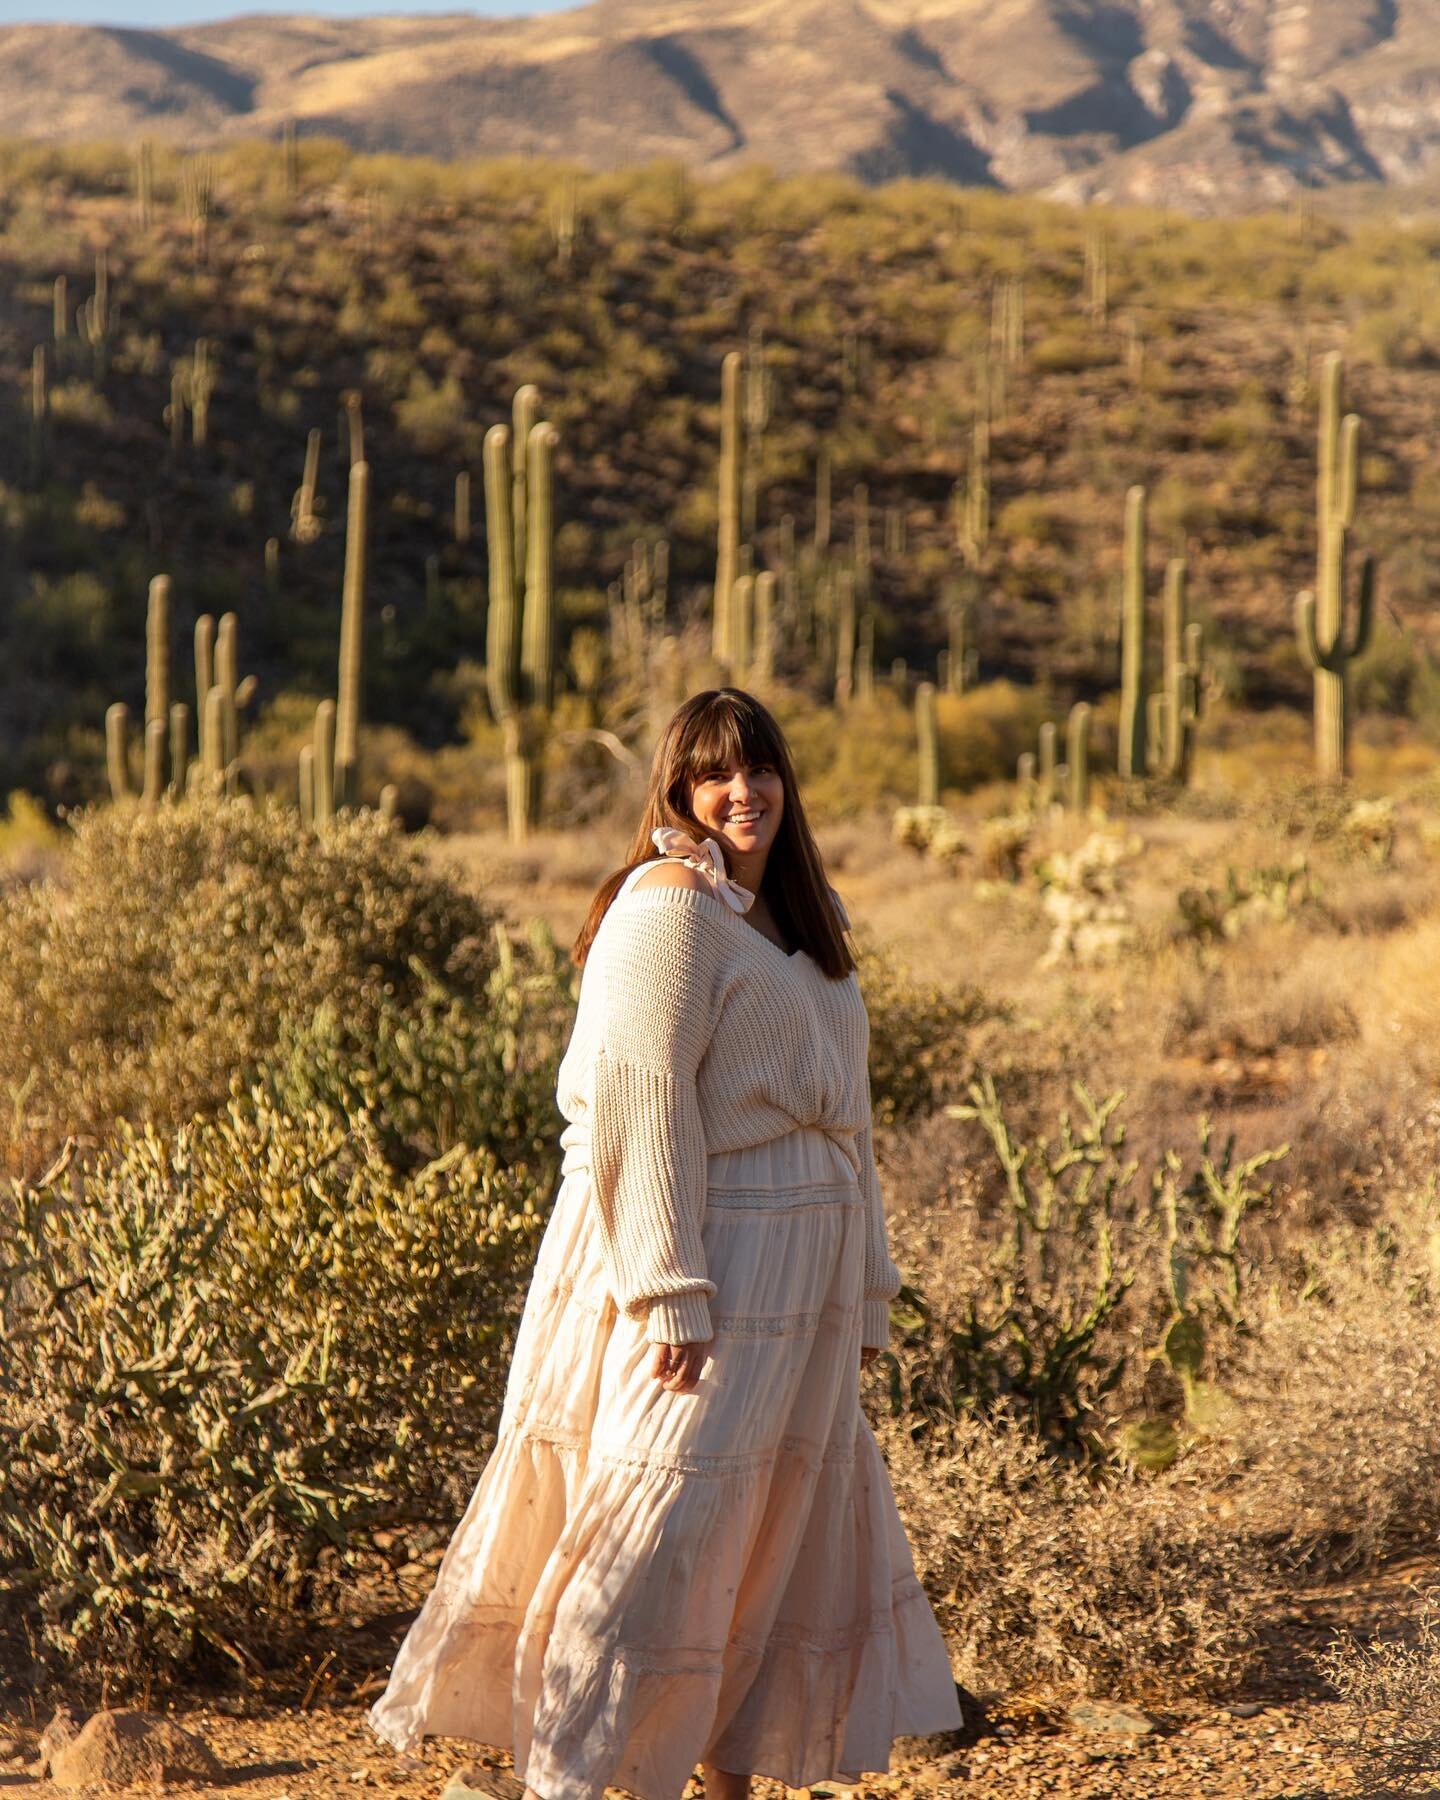 When @taylorswift comes out with two phenomenal albums in one year, you do a shoot inspired by them - desert edition🌵 thankful for my fave model @madisonfenicle and her folklore dress❣️